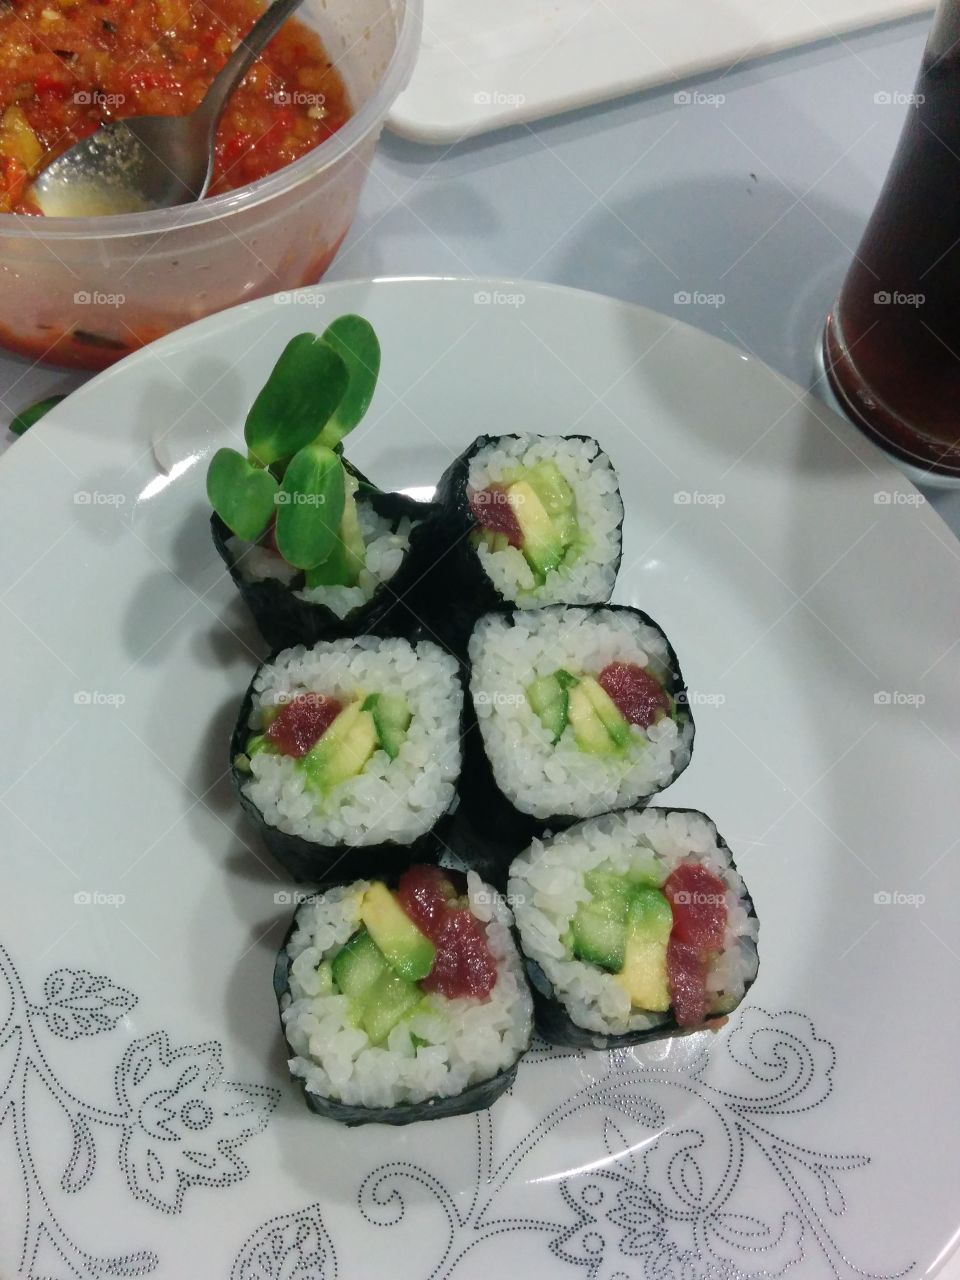 Homemade Sushi. First time making sushi at home, tuna rolls. Delicious!